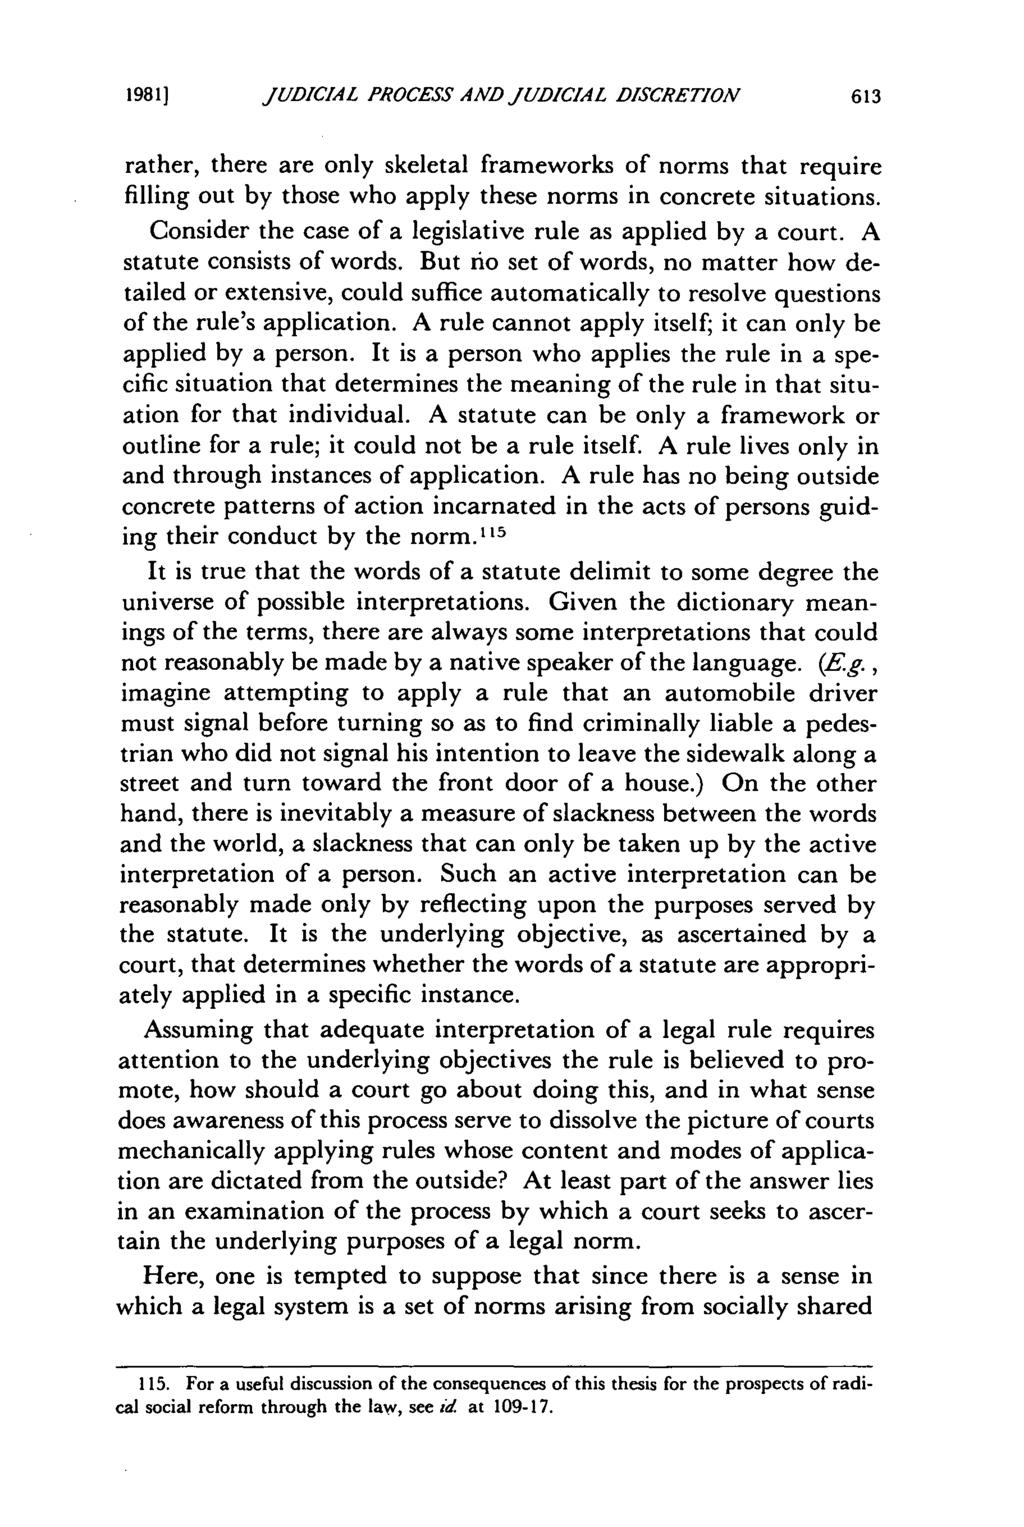 19811 Pannier: The Nature of the Judicial Process and Judicial Discretion JUDICIAL PROCESS AND JUDICIAL DISCRETION rather, there are only skeletal frameworks of norms that require filling out by